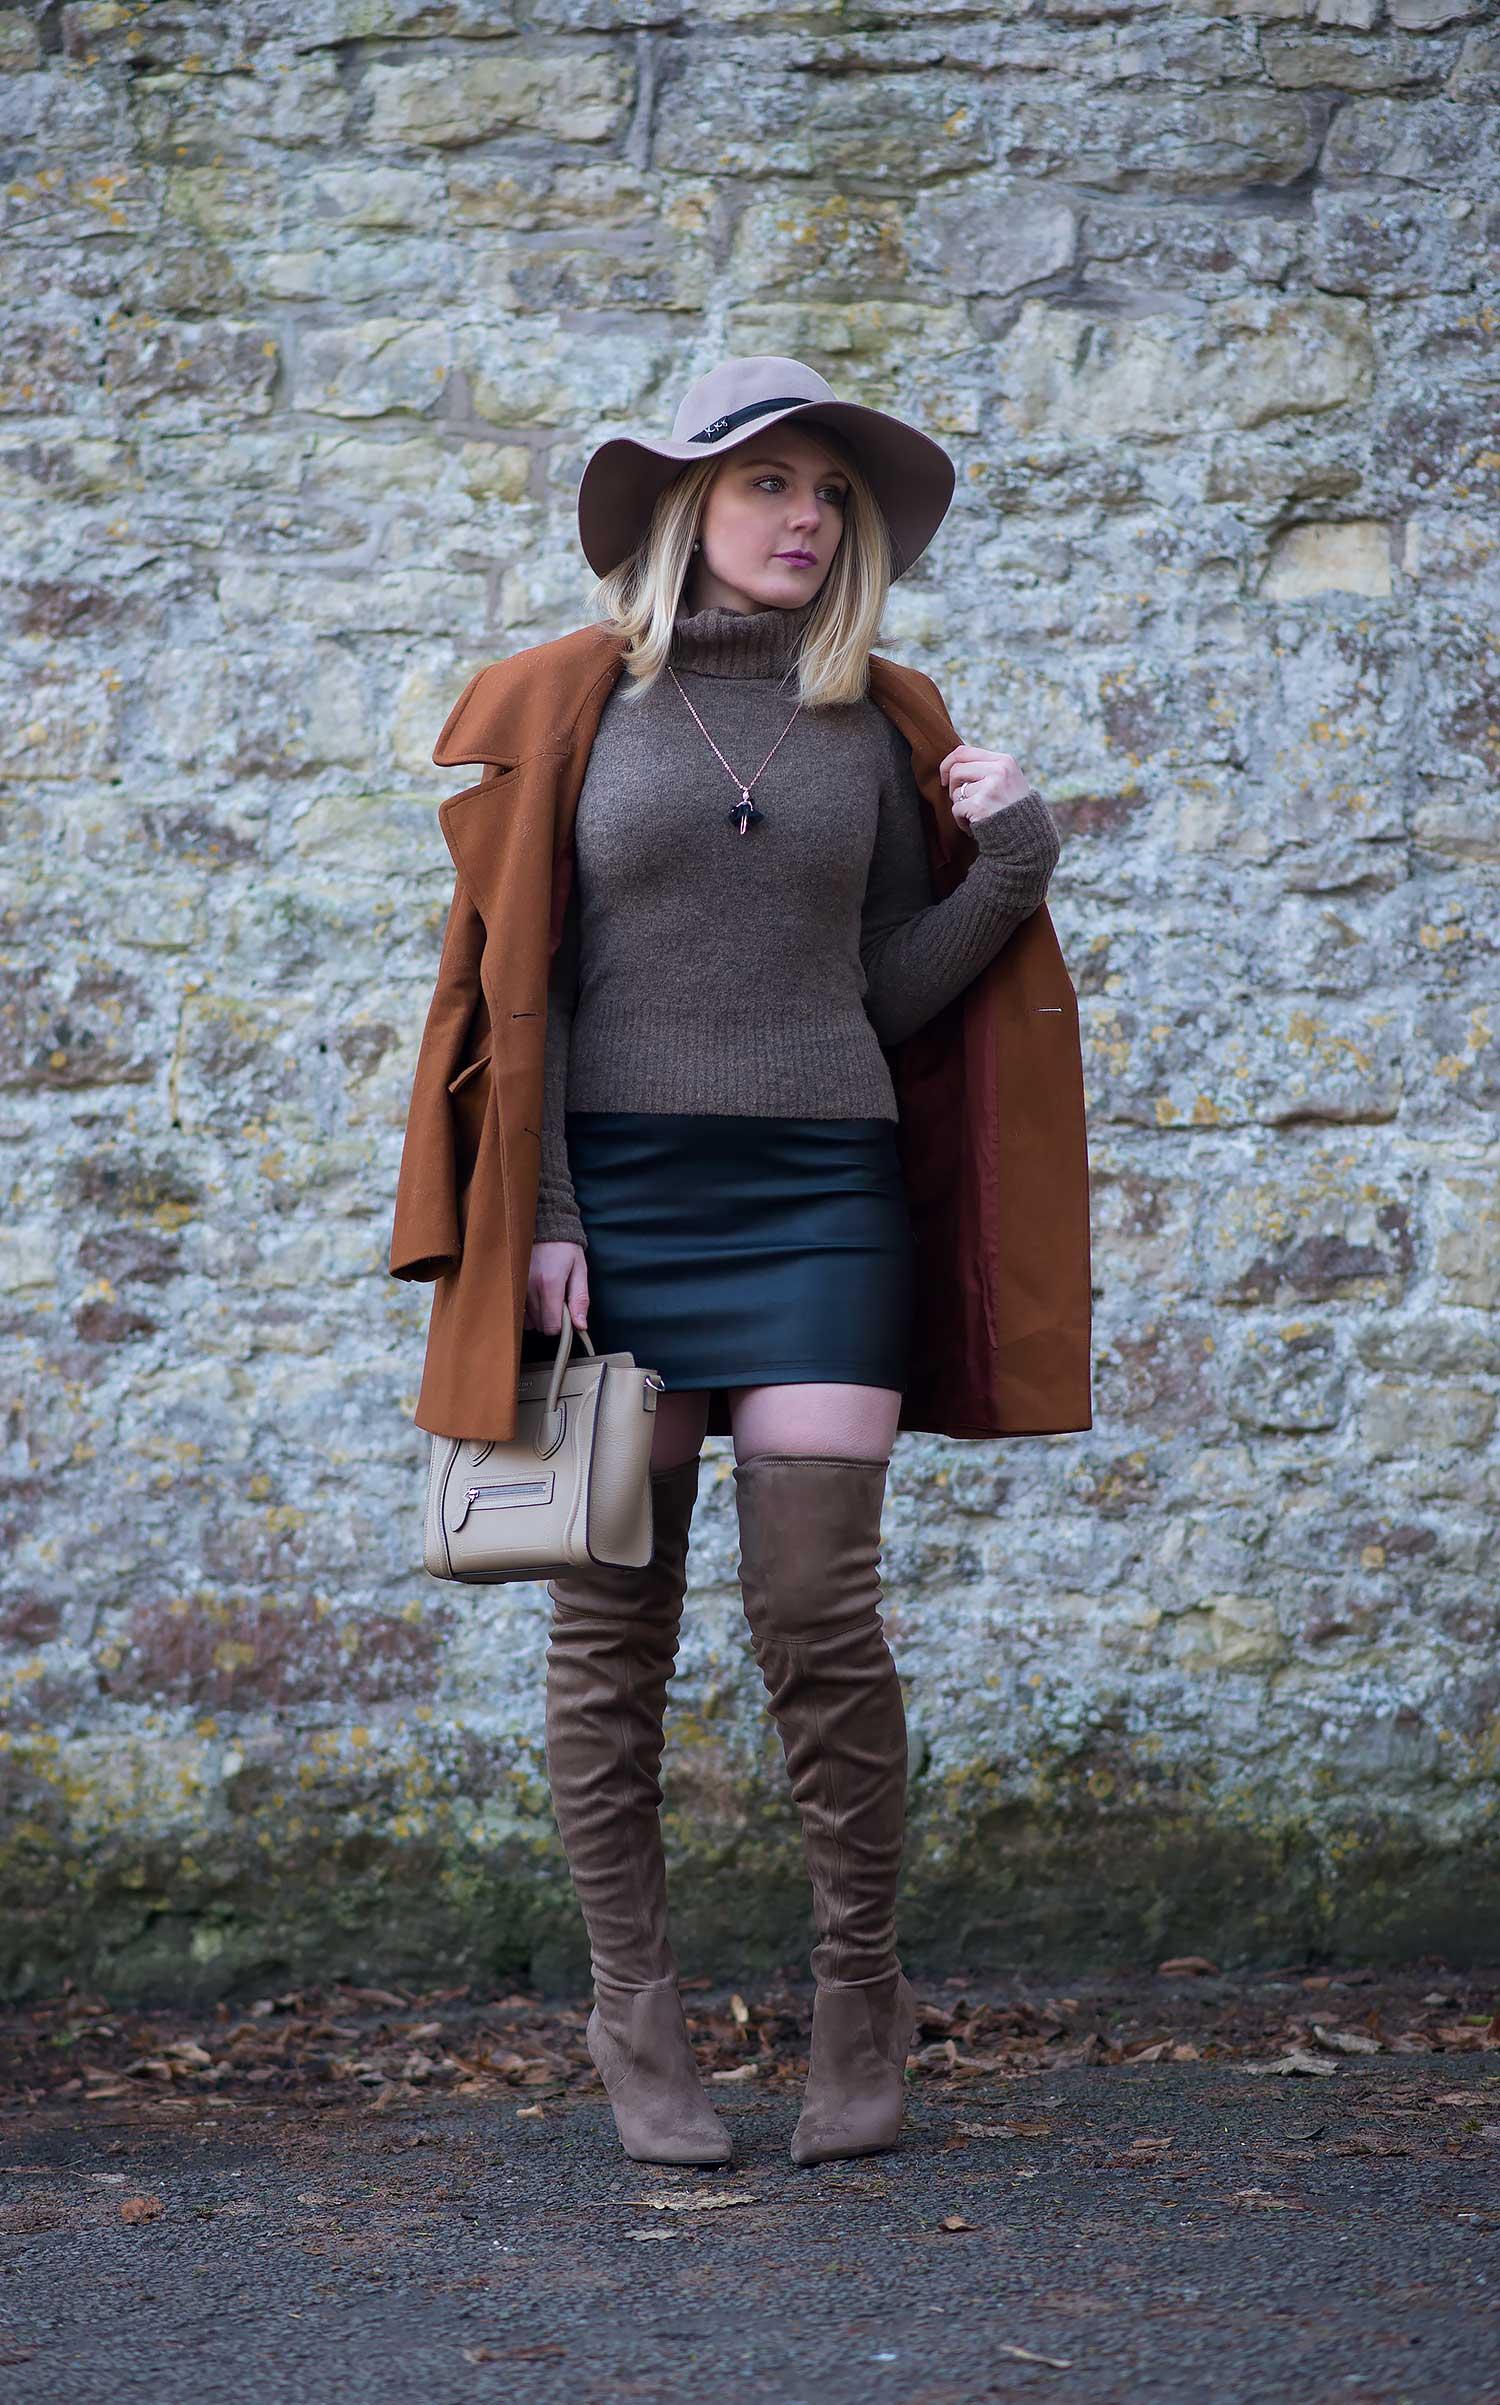 The Leather Mini Skirt With Suede Boots 